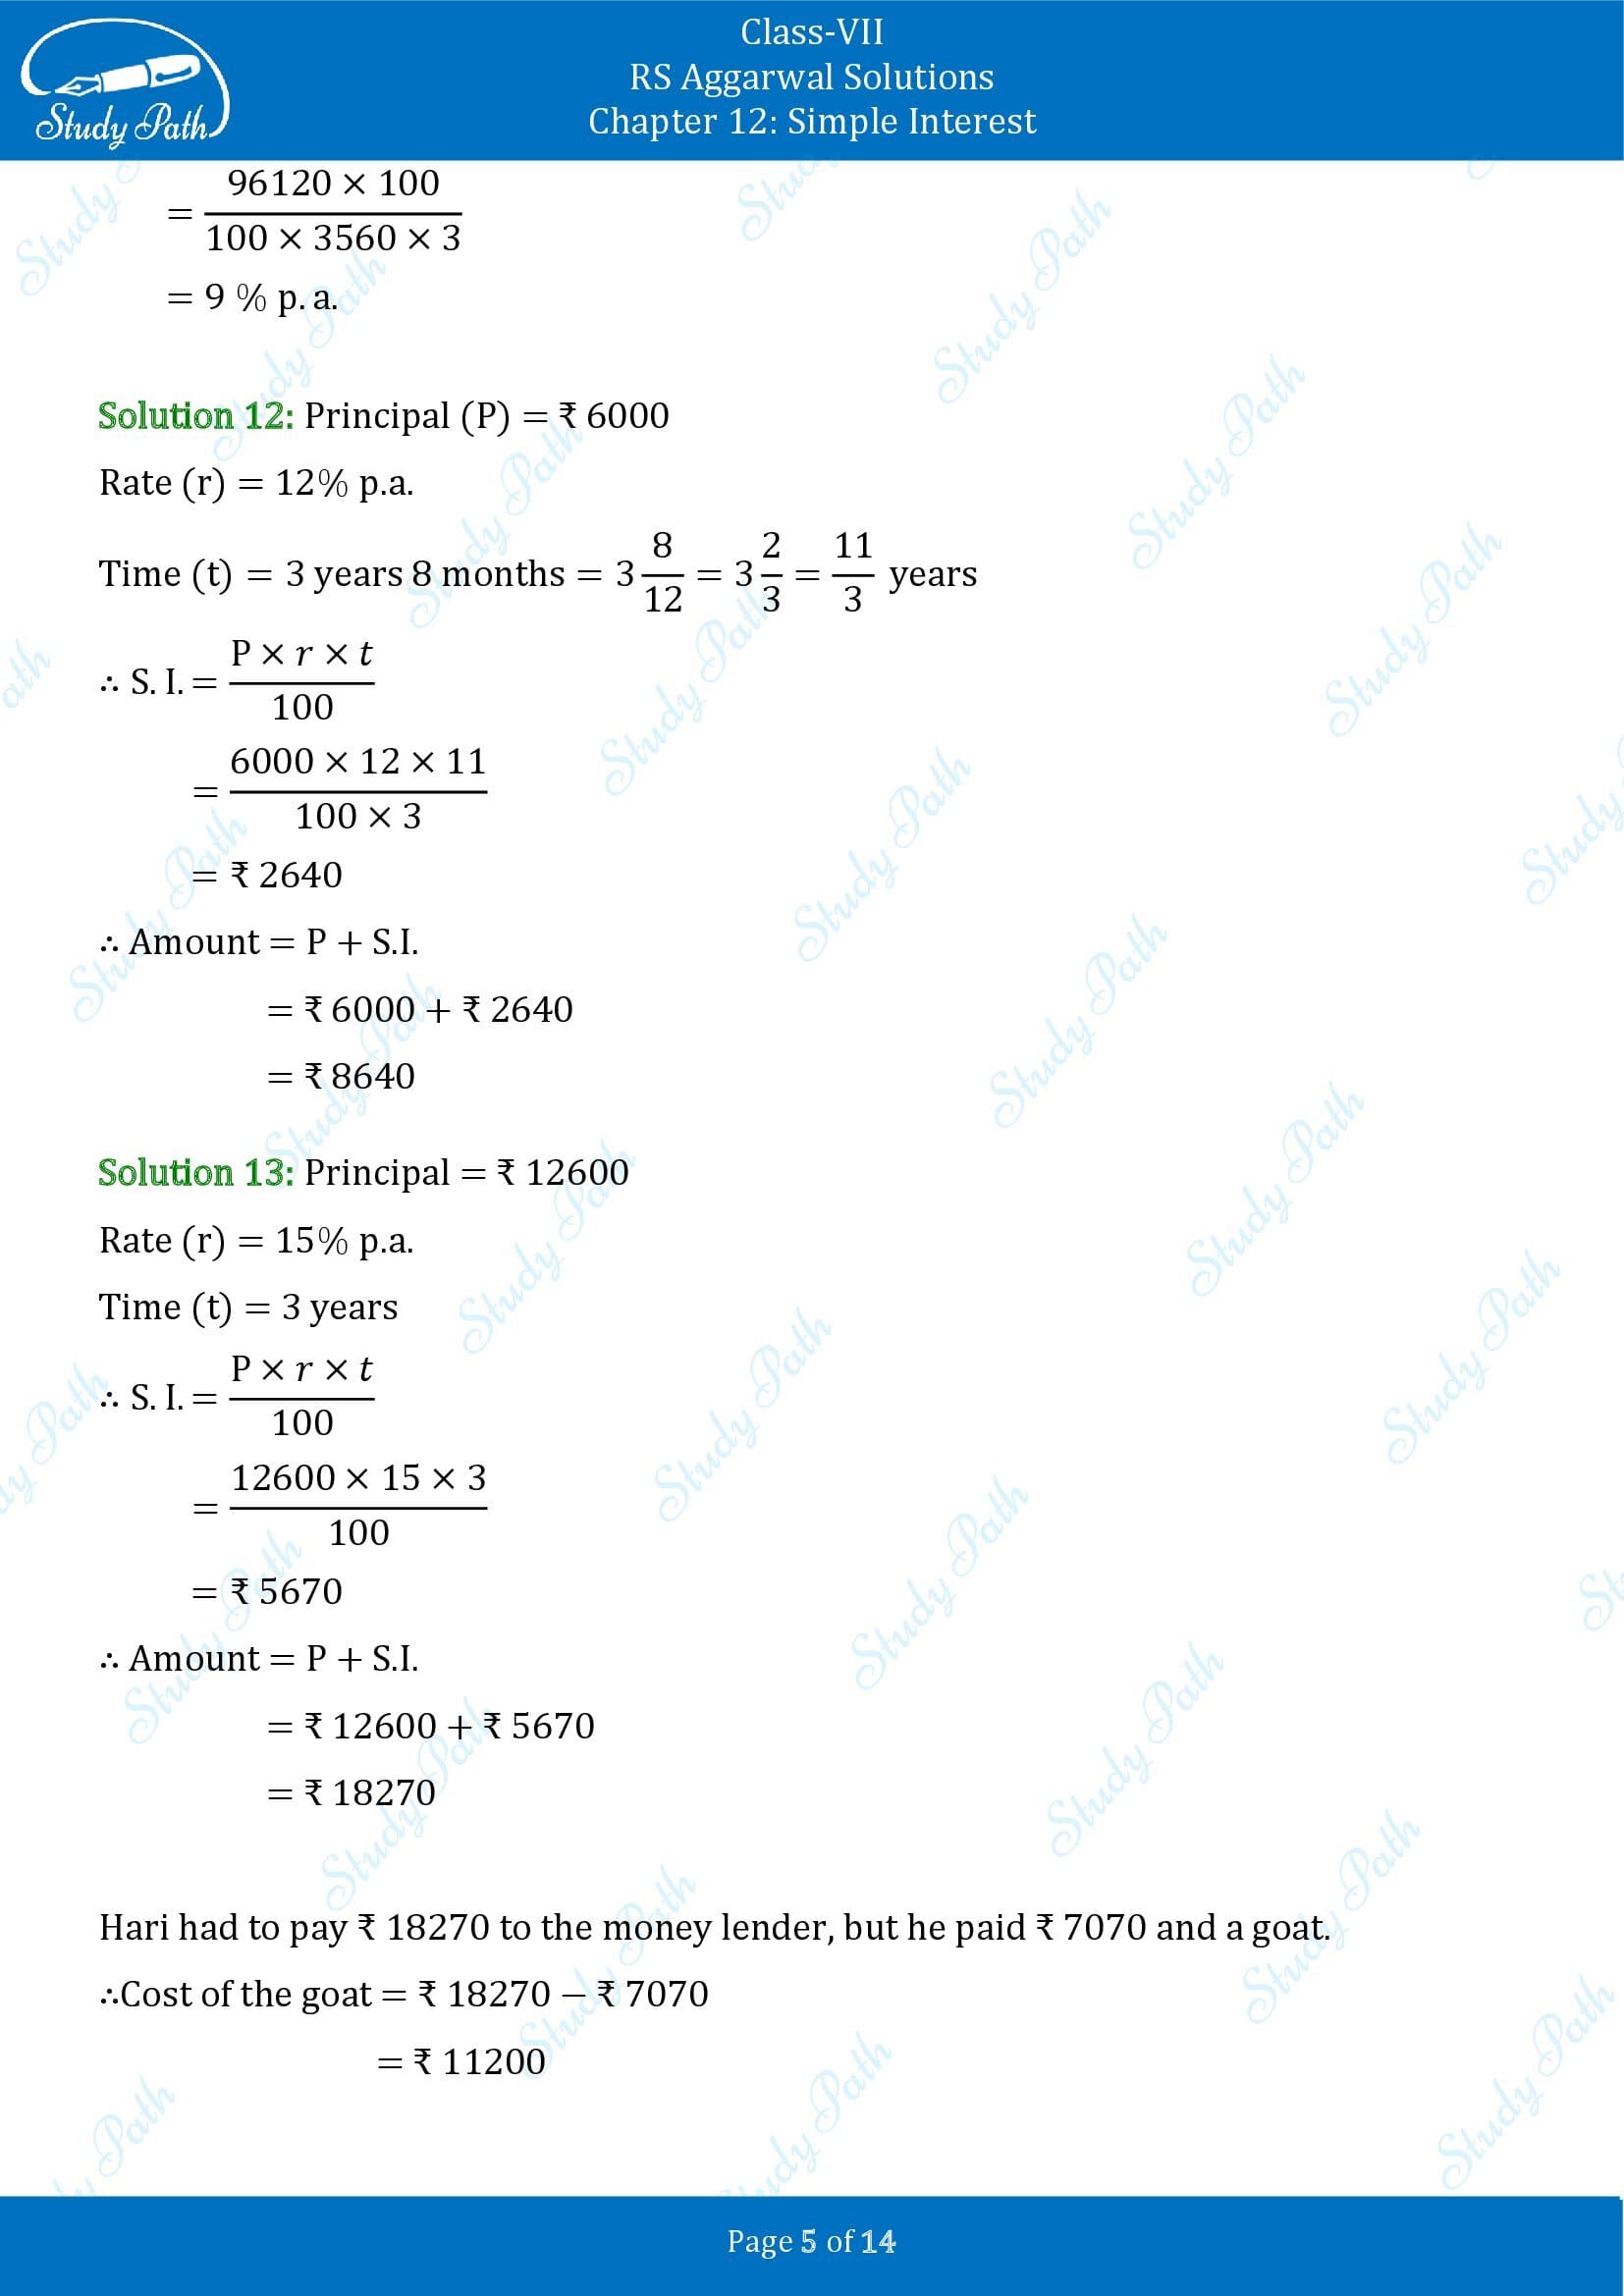 RS Aggarwal Solutions Class 7 Chapter 12 Simple Interest Exercise 12A 00005